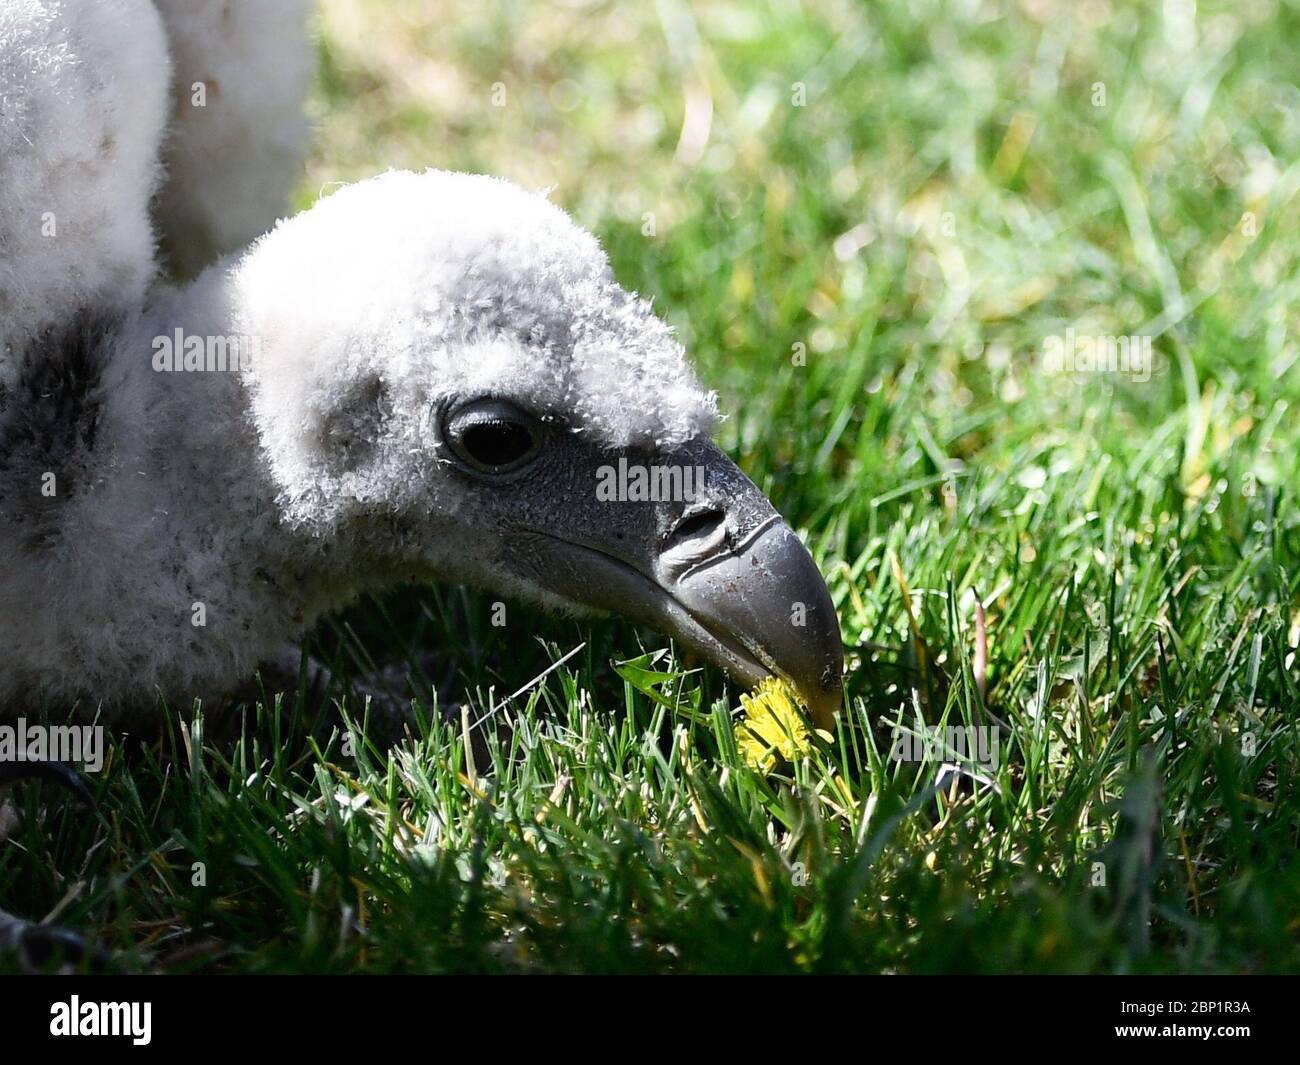 Xining. 17th May, 2020. Photo taken on May 17, 2020 shows a captive-bred Himalayan vulture at the Xining Wildlife Park in Xining, northwest China's Qinghai Province. Two captive-bred Himalayan vultures made their public appearance at the Xining Wildlife Park on Sunday. The two baby birds, both in good physical conditions, are the third and fourth existing captive-bred Himalayan vultures across the country. Credit: Zhang Long/Xinhua/Alamy Live News Stock Photo